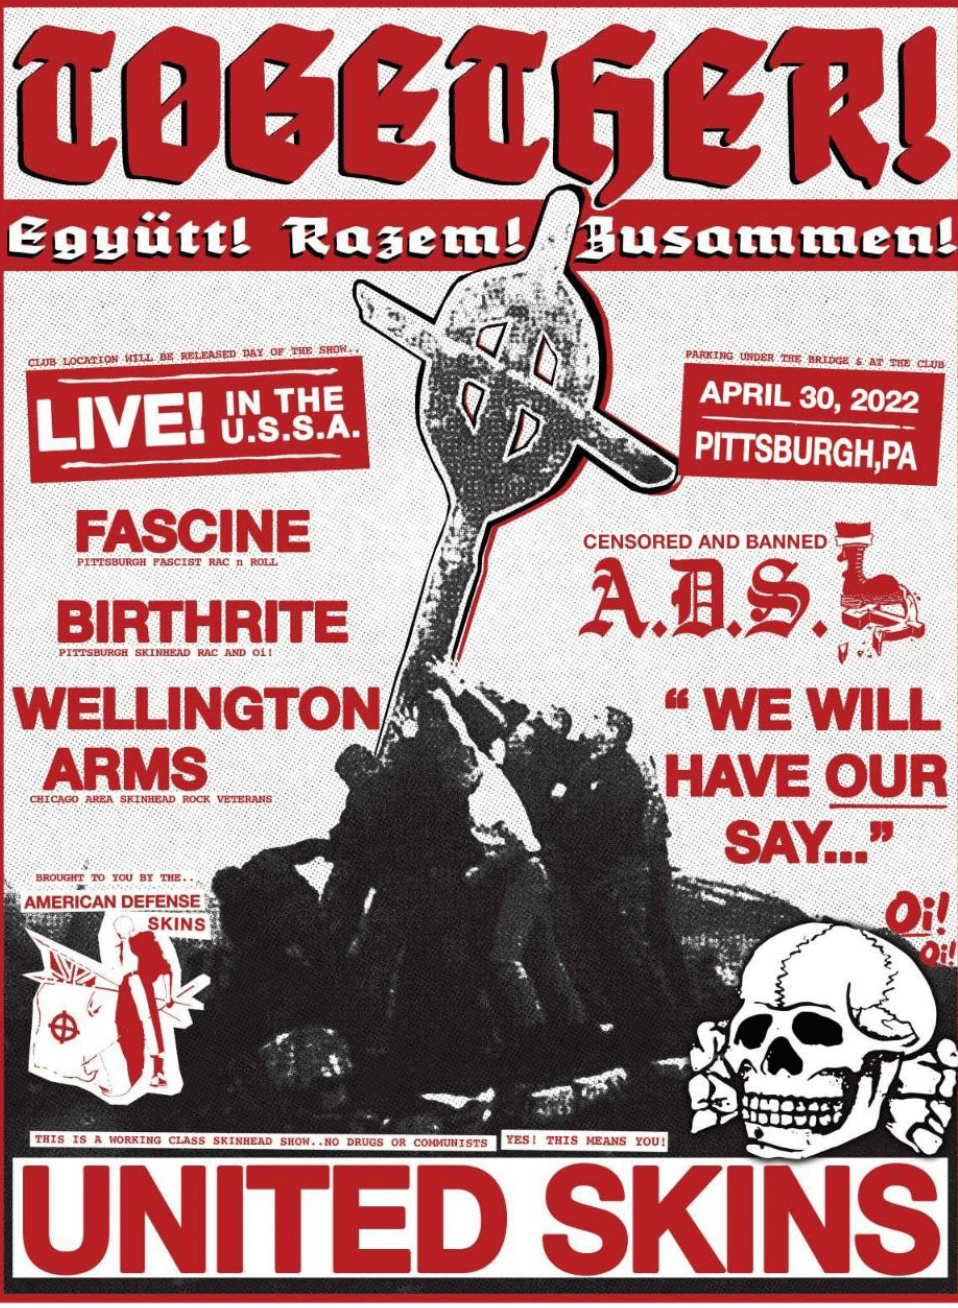 American Defense Skinheads Announce 30 April Rally"We Will Have Our Say..." in Pittsburg, Pennsylvania, United States